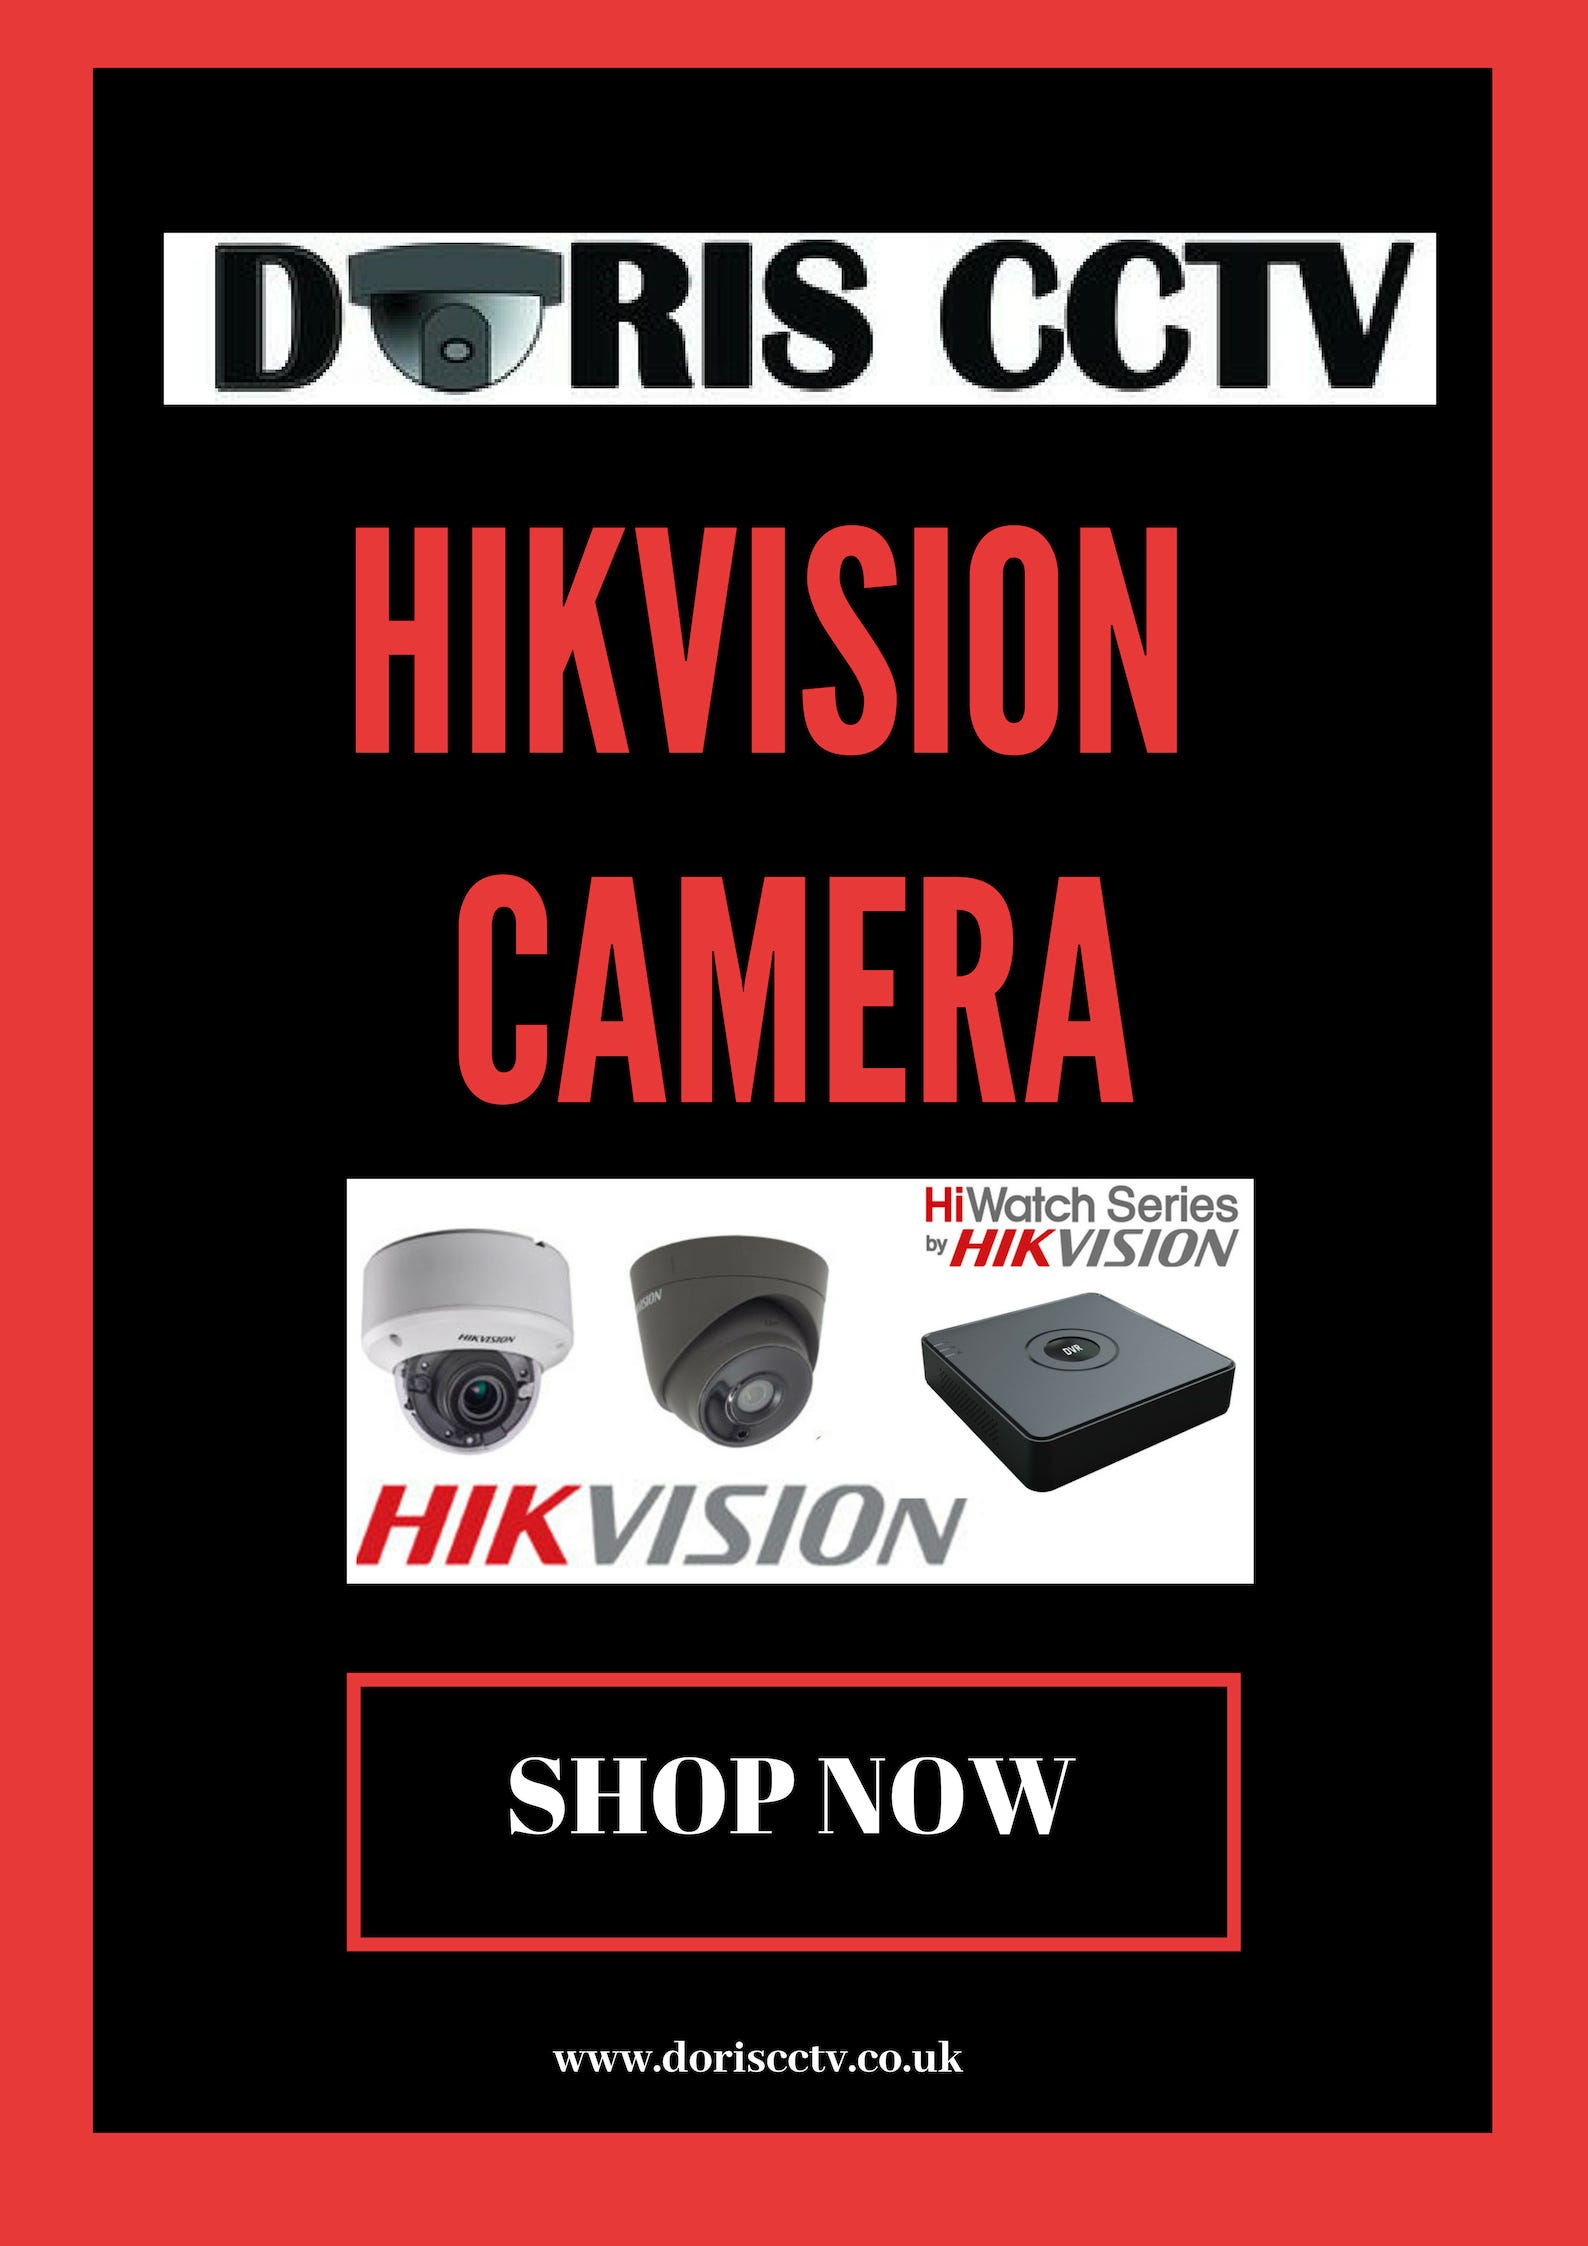 HIKVISION Camera. Sometimes you need to 